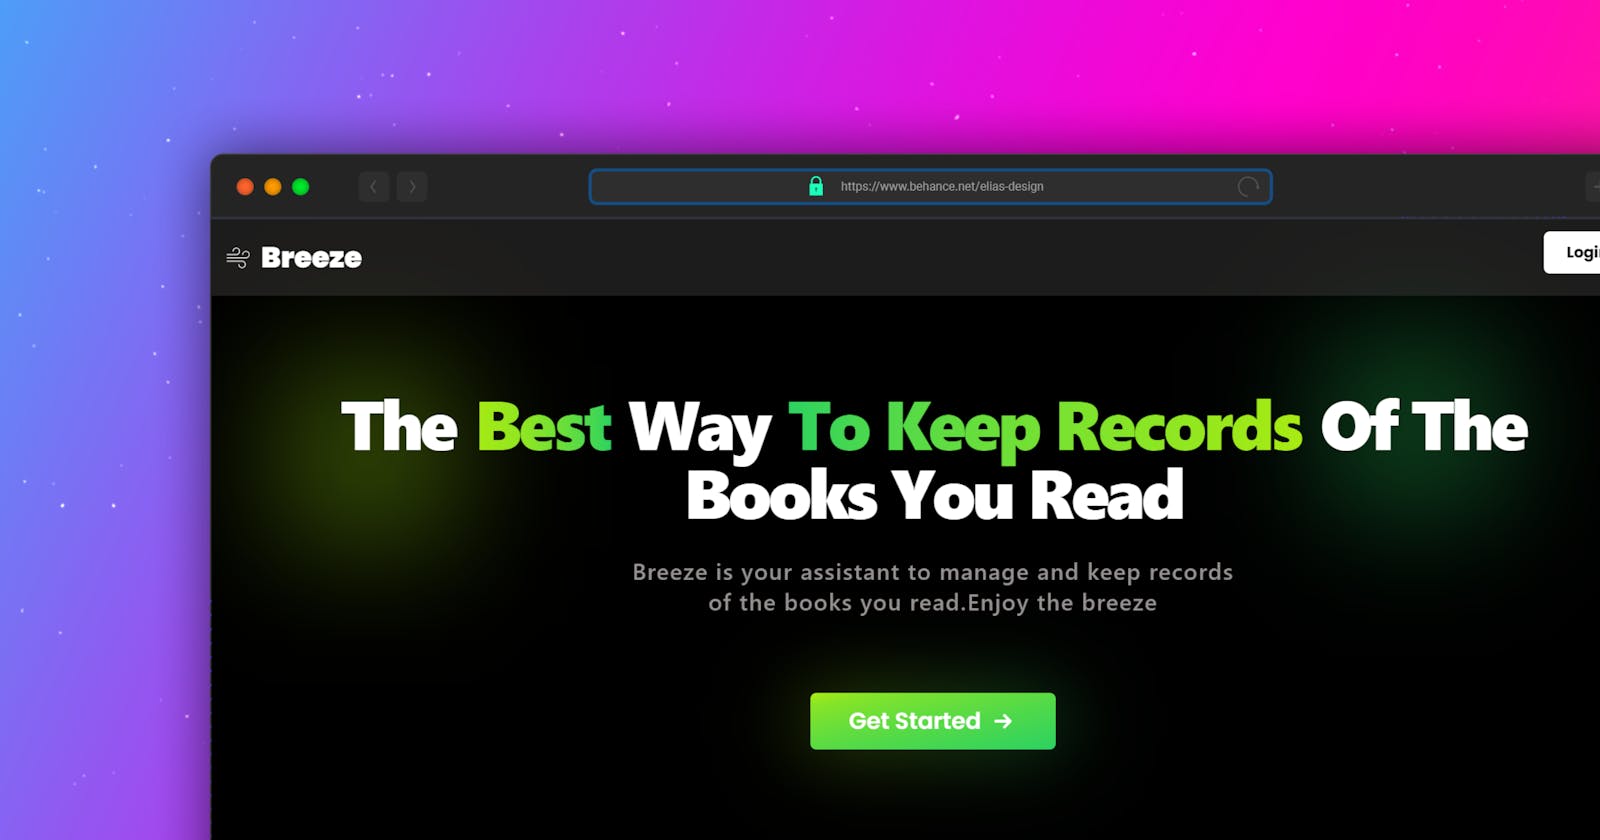 Introducing Breeze - The Best Way To Keep Records Of The Books You Read